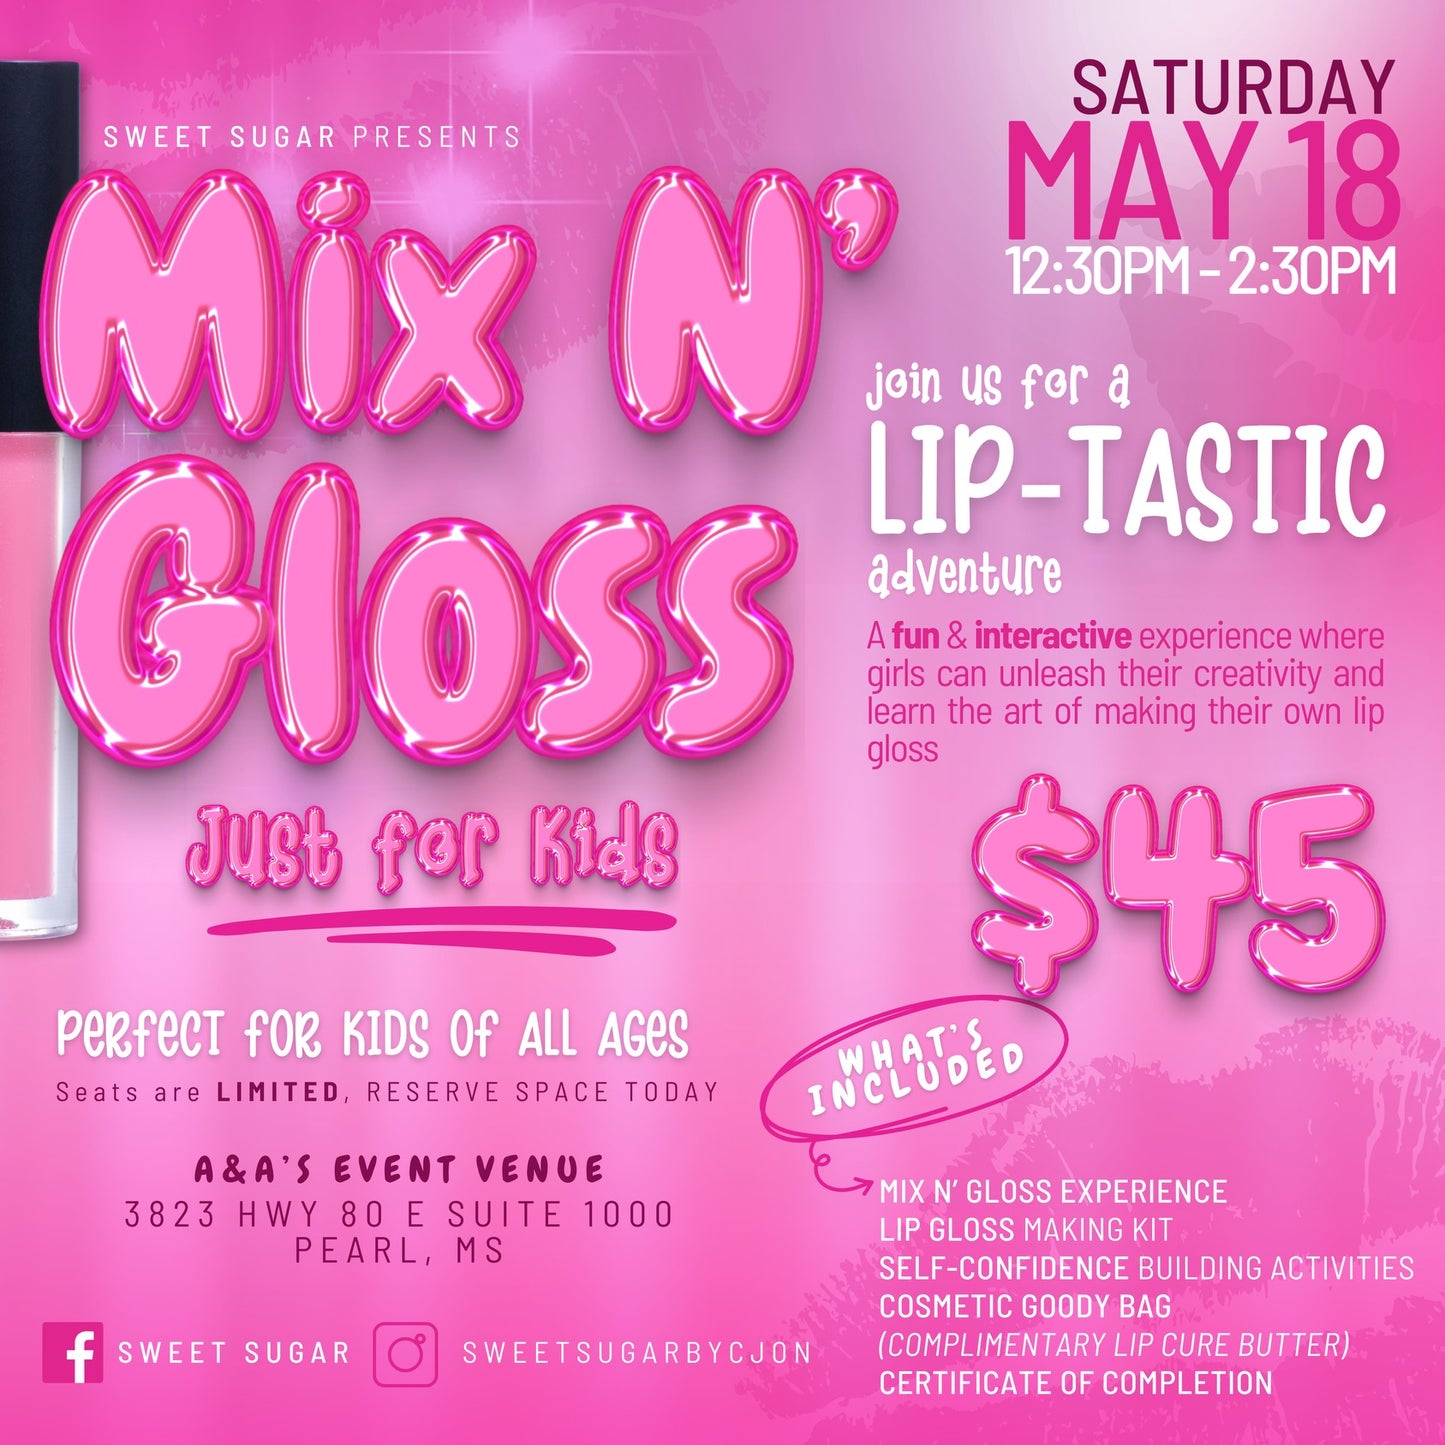 Mix N' Gloss— Just for kids!